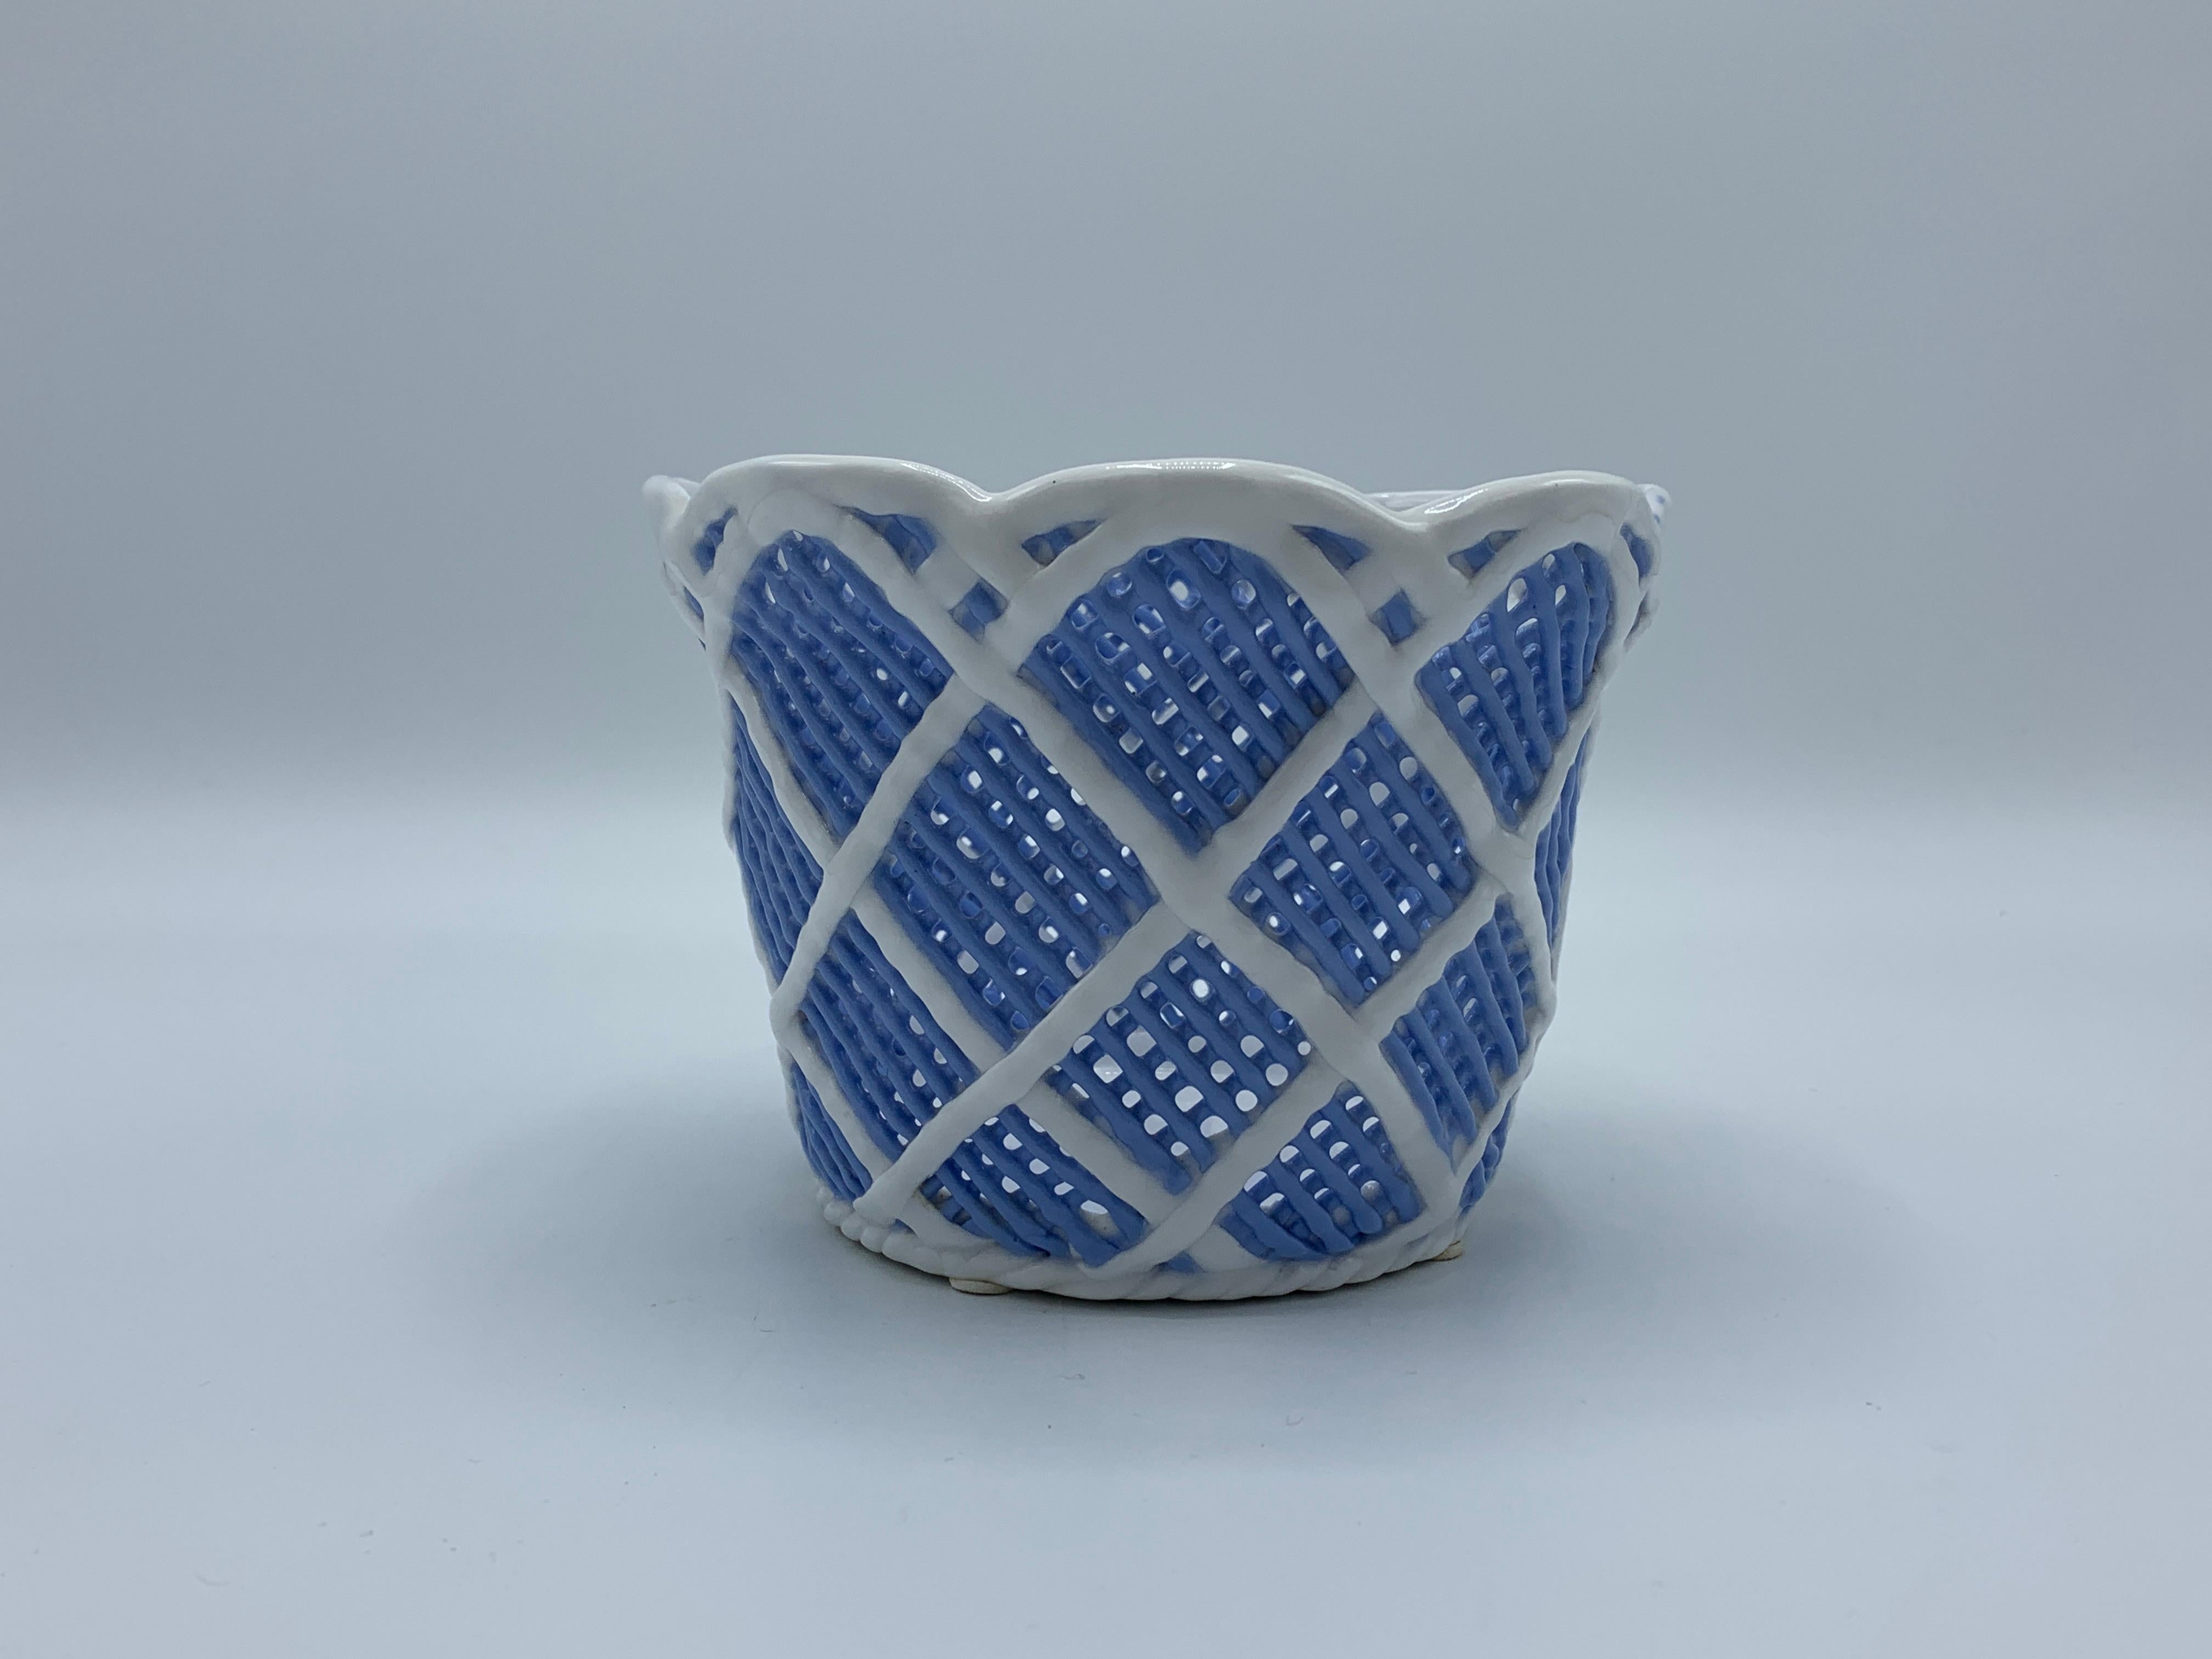 Listed is a fabulous, 1960s Italian baby blue and white porcelain cachepot. The piece has a gorgeous pierced basketweave motif all-over and is in exquisite condition. Extremely rare to find this color, especially in such great condition.